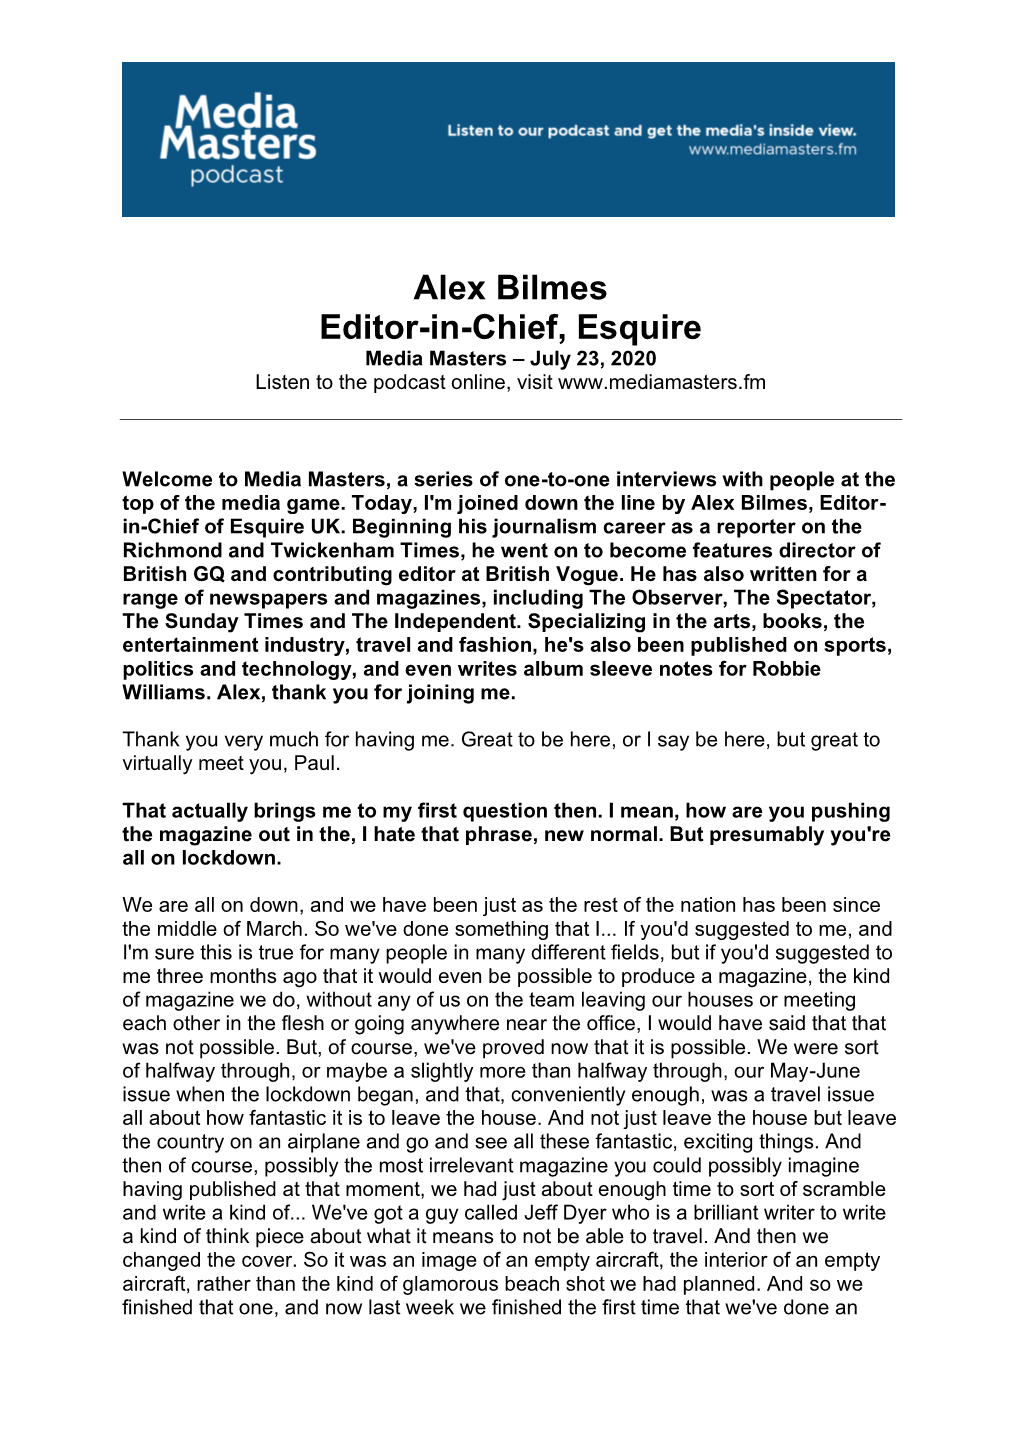 Alex Bilmes Editor-In-Chief, Esquire Media Masters – July 23, 2020 Listen to the Podcast Online, Visit